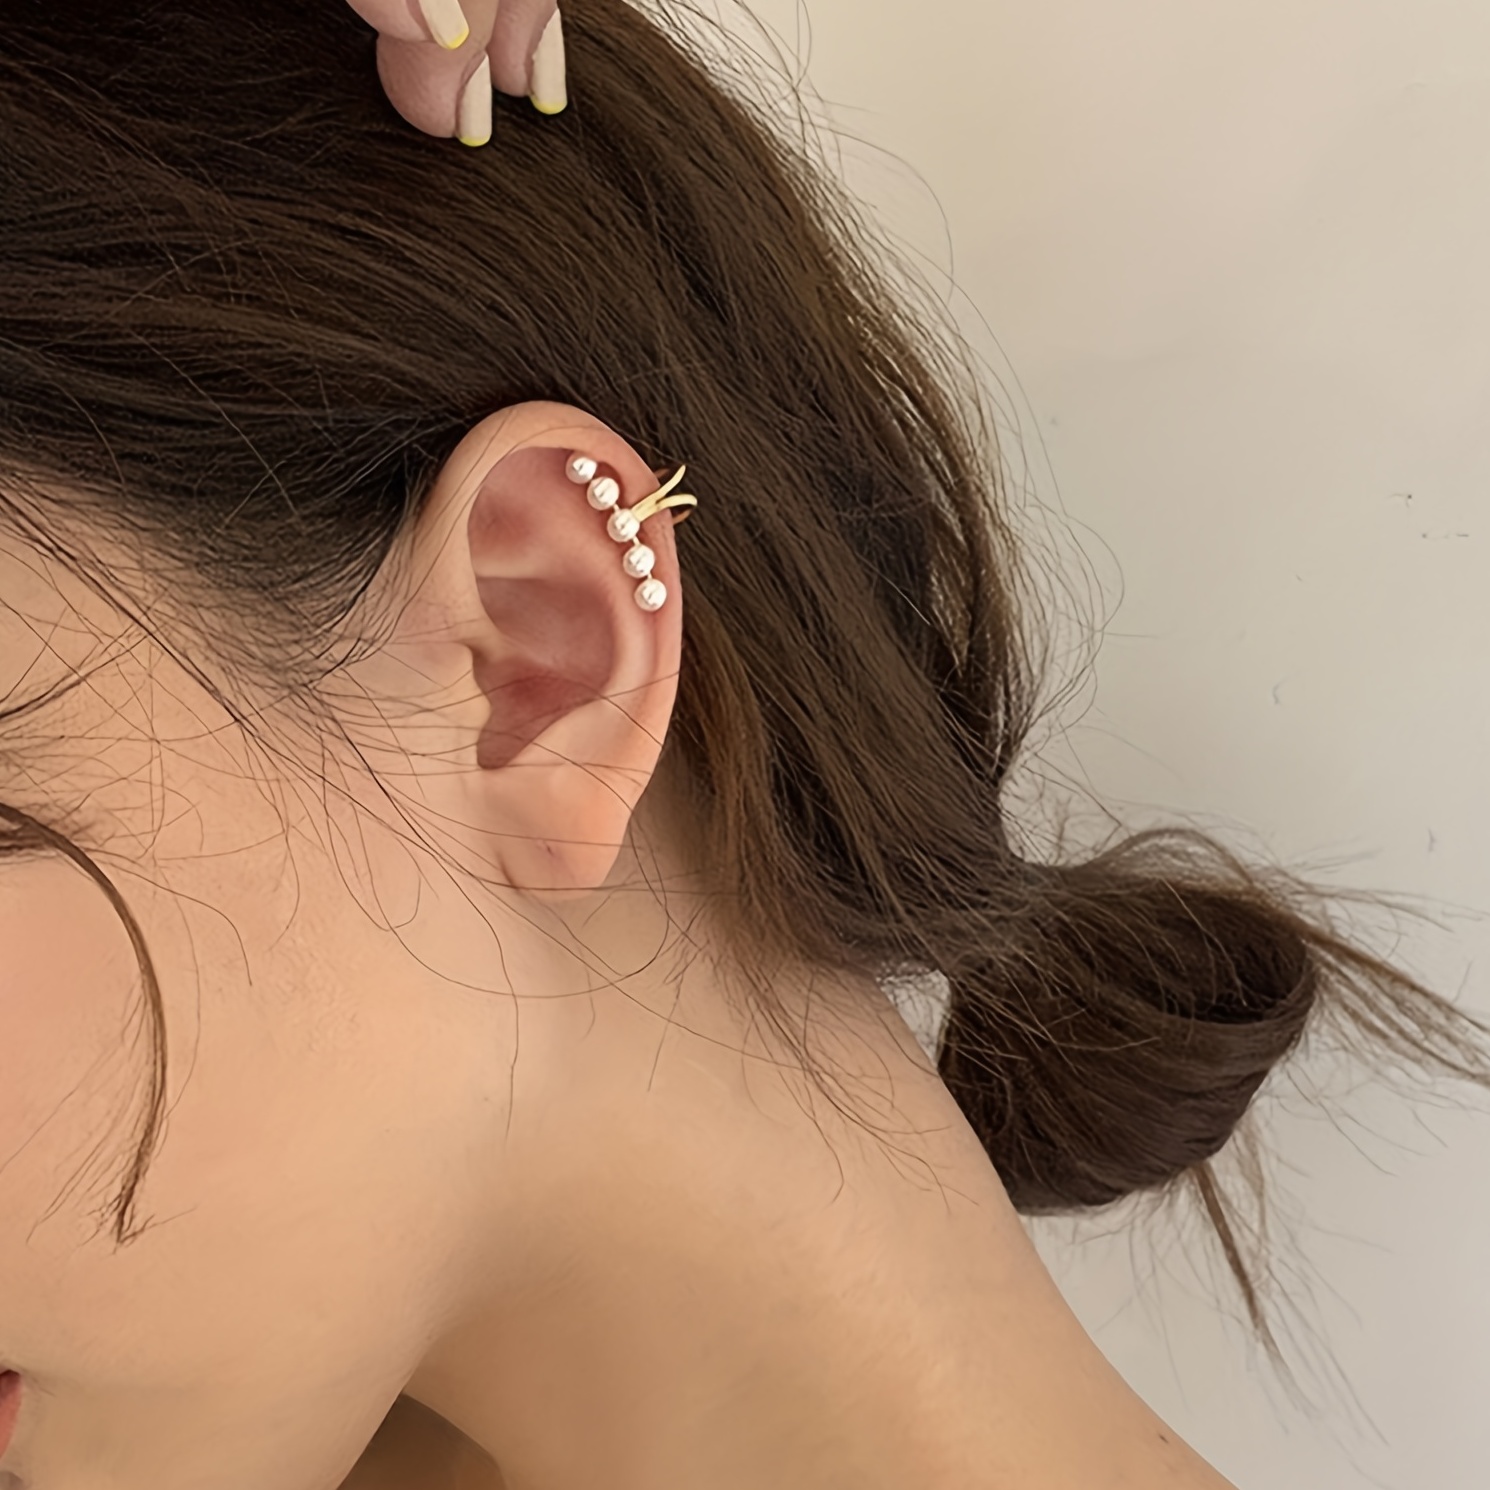 Classy Girls Wear Pearls  Our Daughter's Ear Piercing Experience at  Claire's - Just Brennon Blog